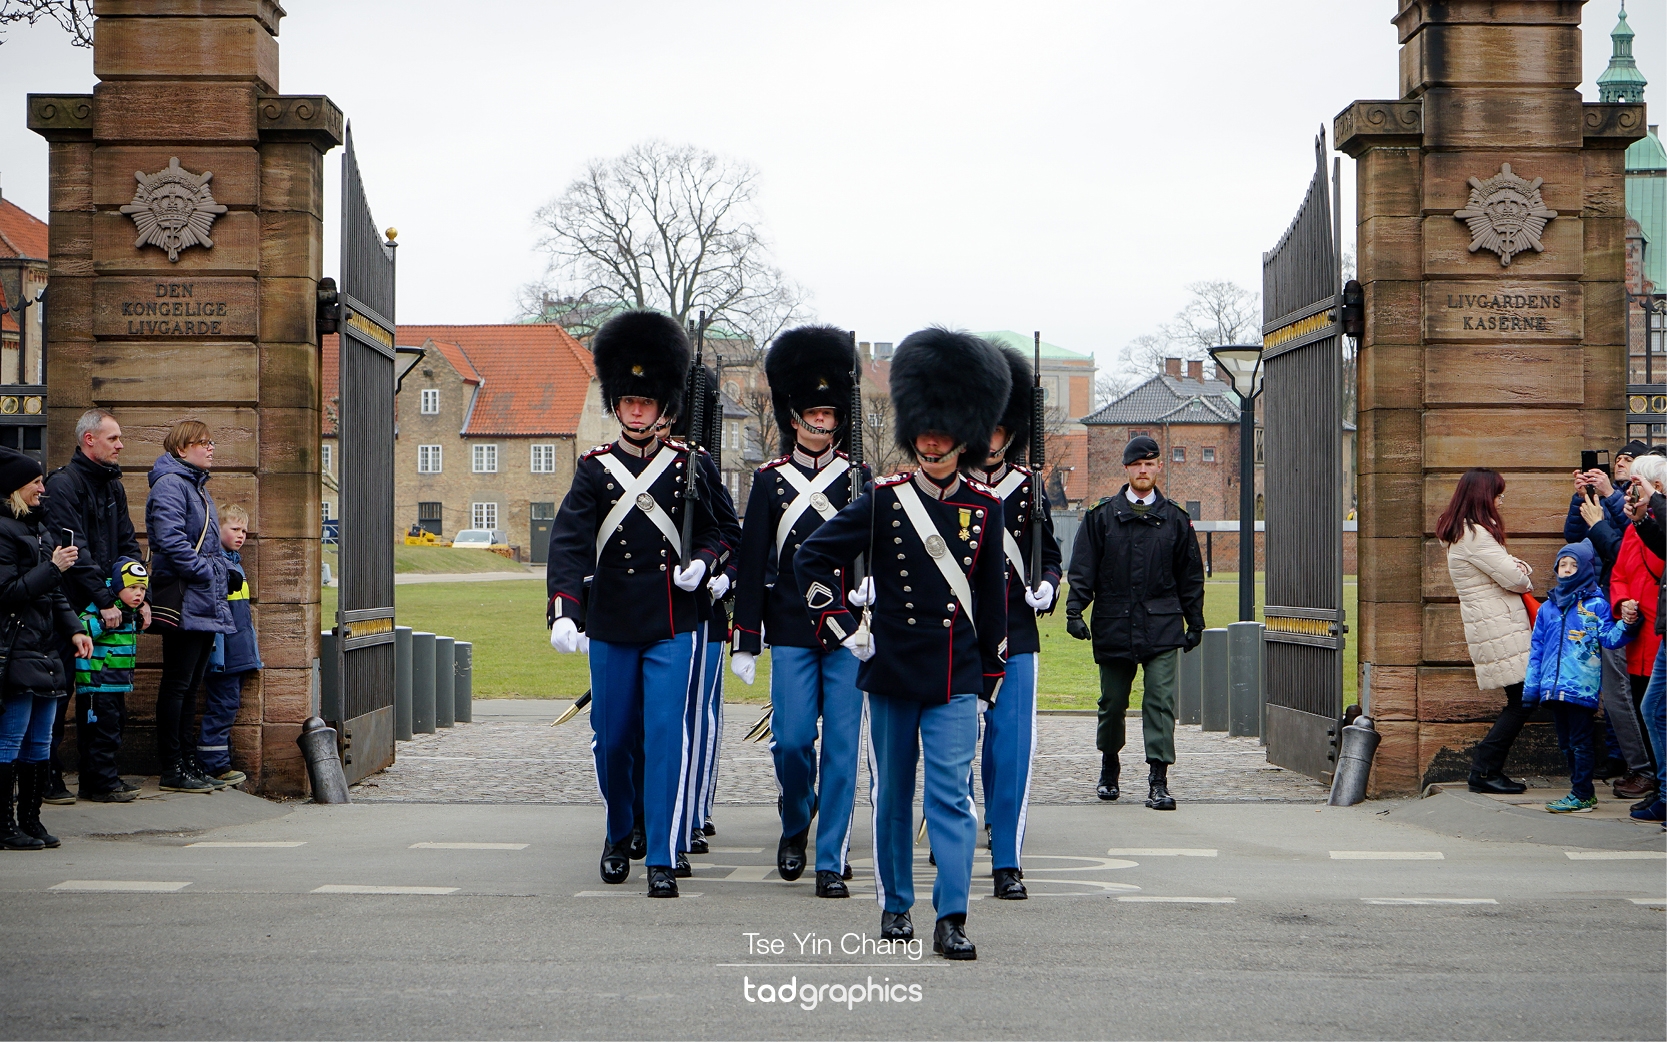 Everyday a new group of guards marches from Rosenborg Castle to the Queen’s palace to relieve those who are stationed there